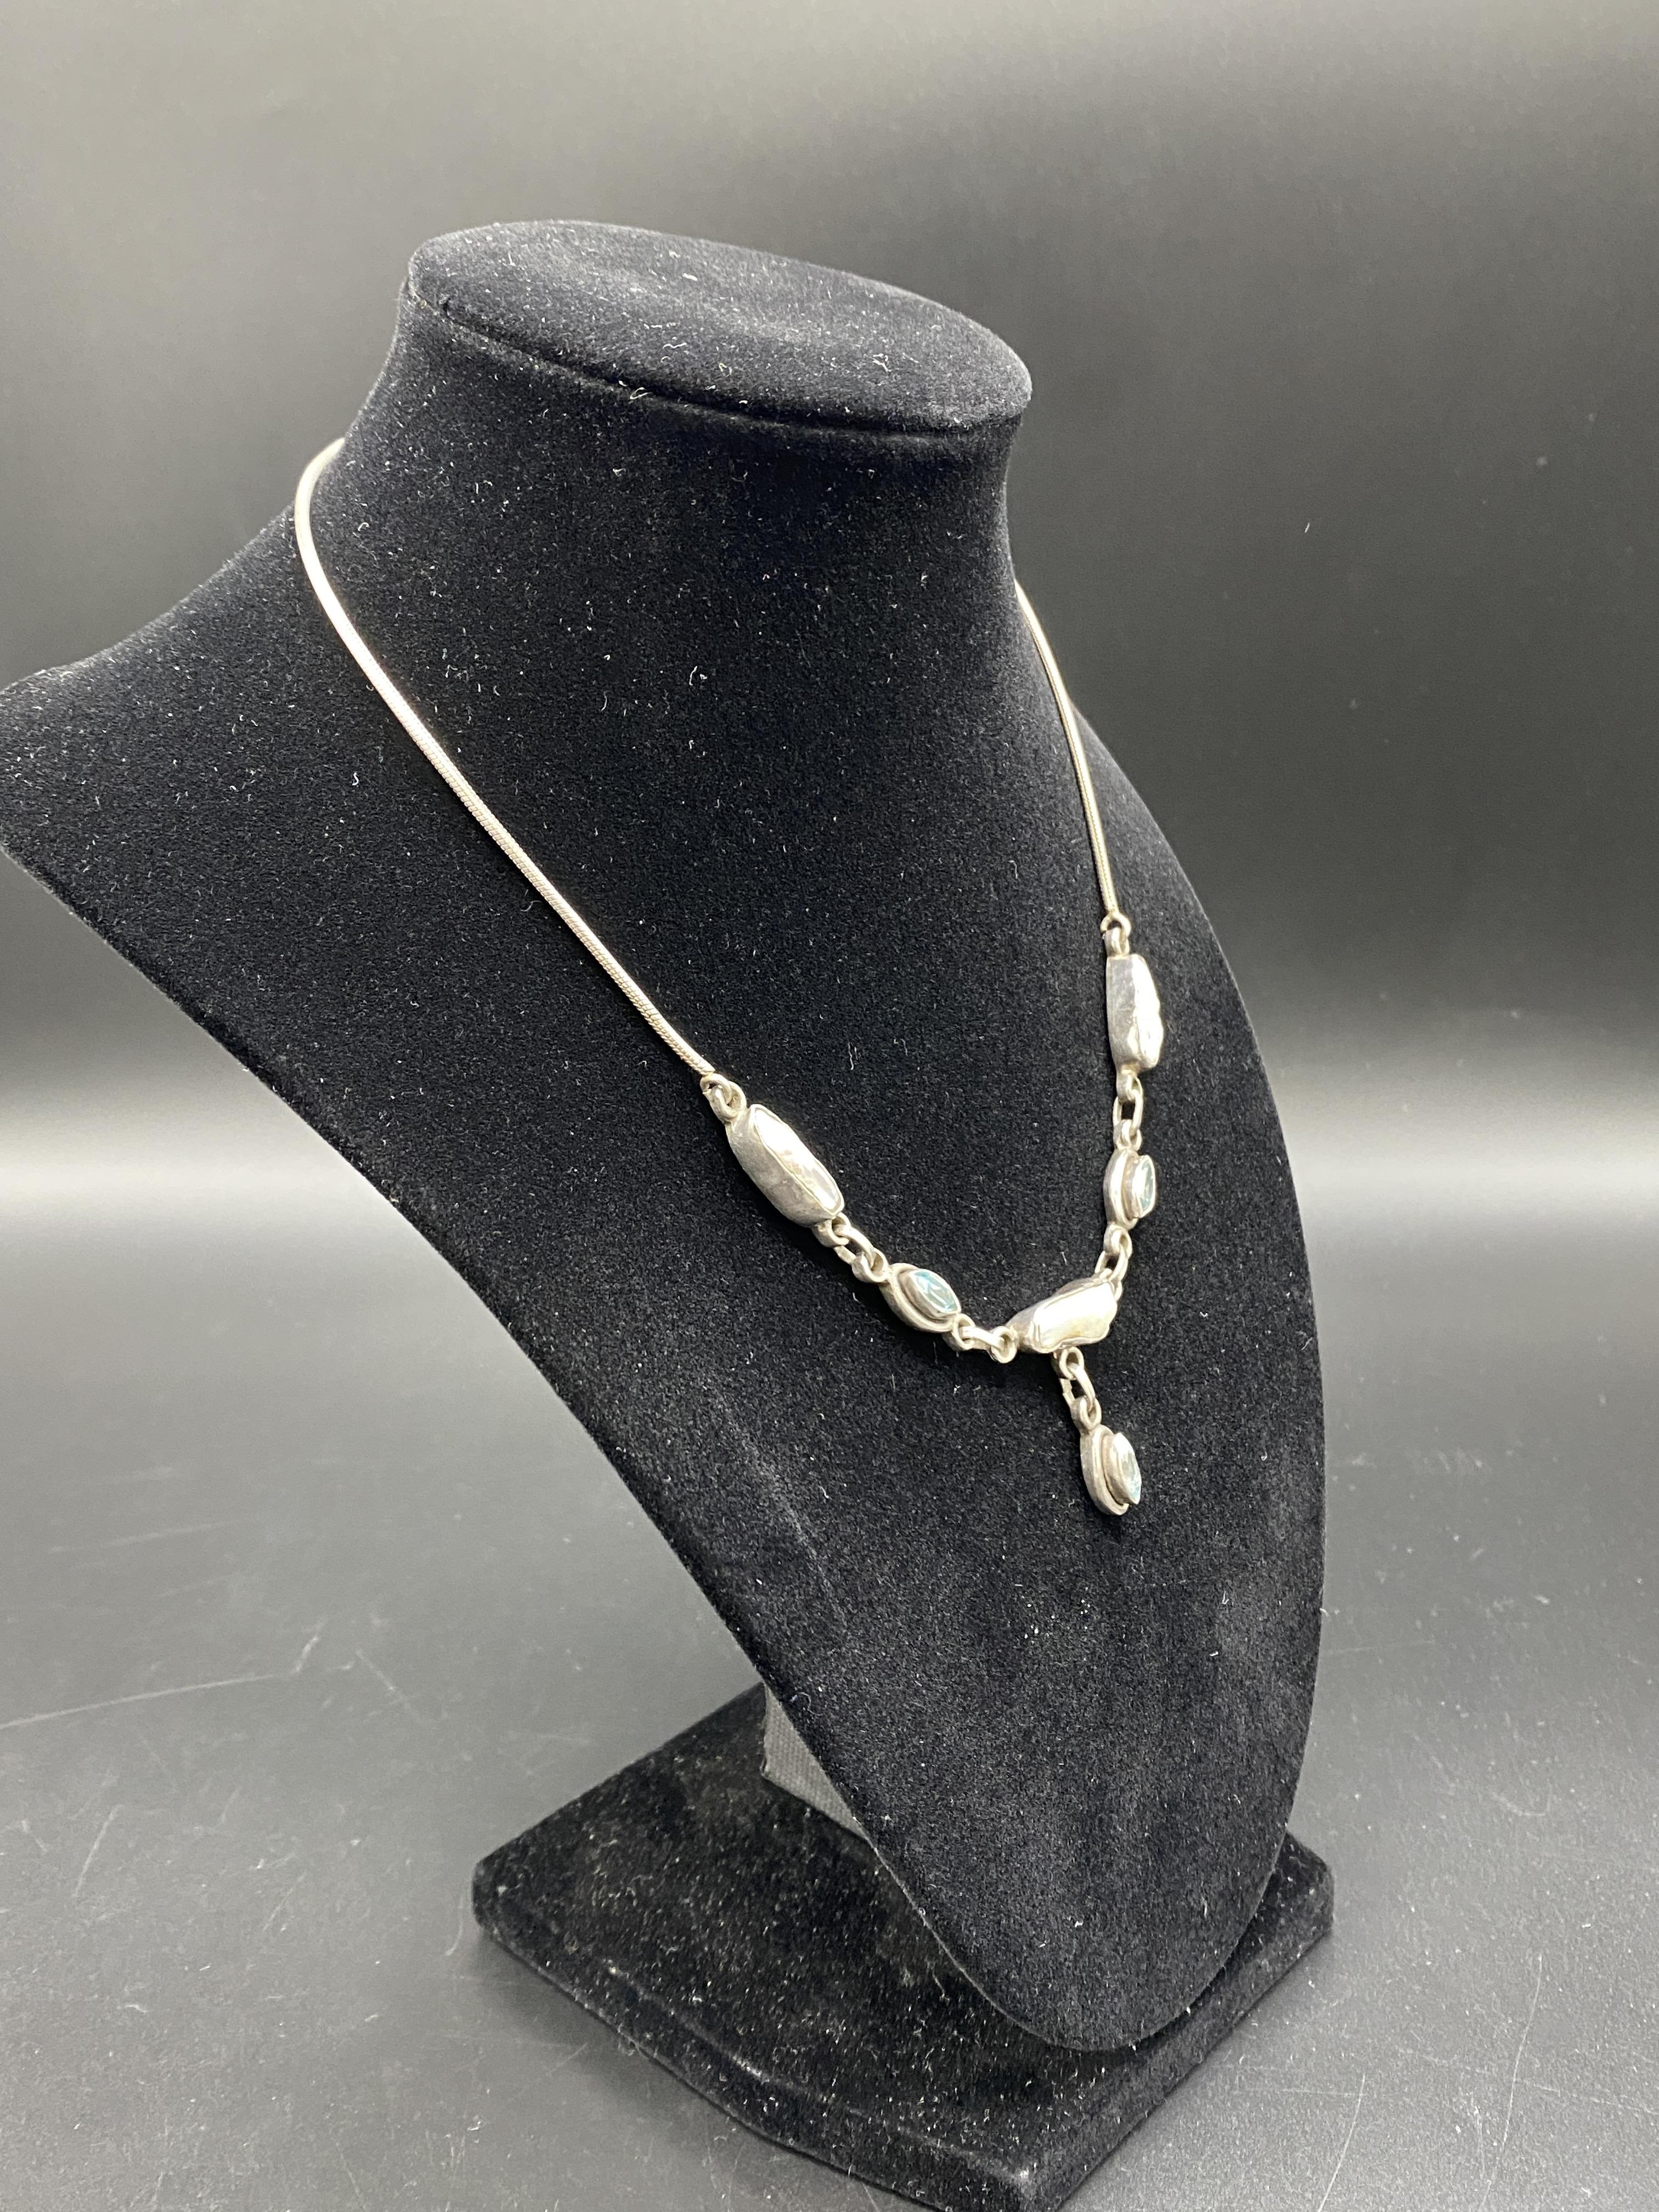 Silver necklace set with pearls - Image 3 of 4